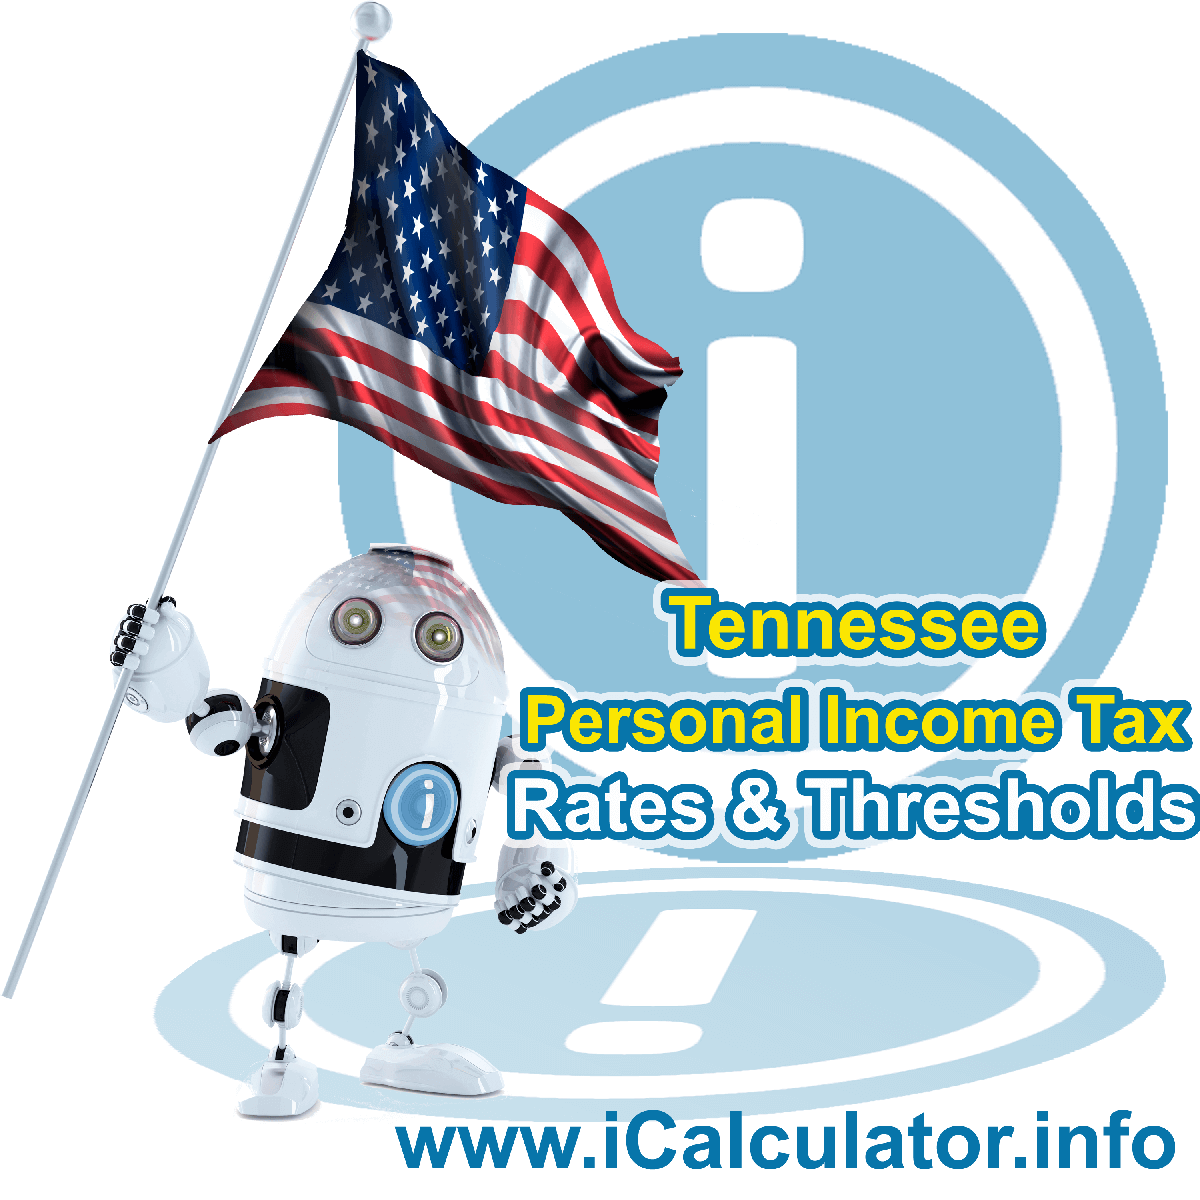 Tennessee State Tax Tables 2018. This image displays details of the Tennessee State Tax Tables for the 2018 tax return year which is provided in support of the 2018 US Tax Calculator